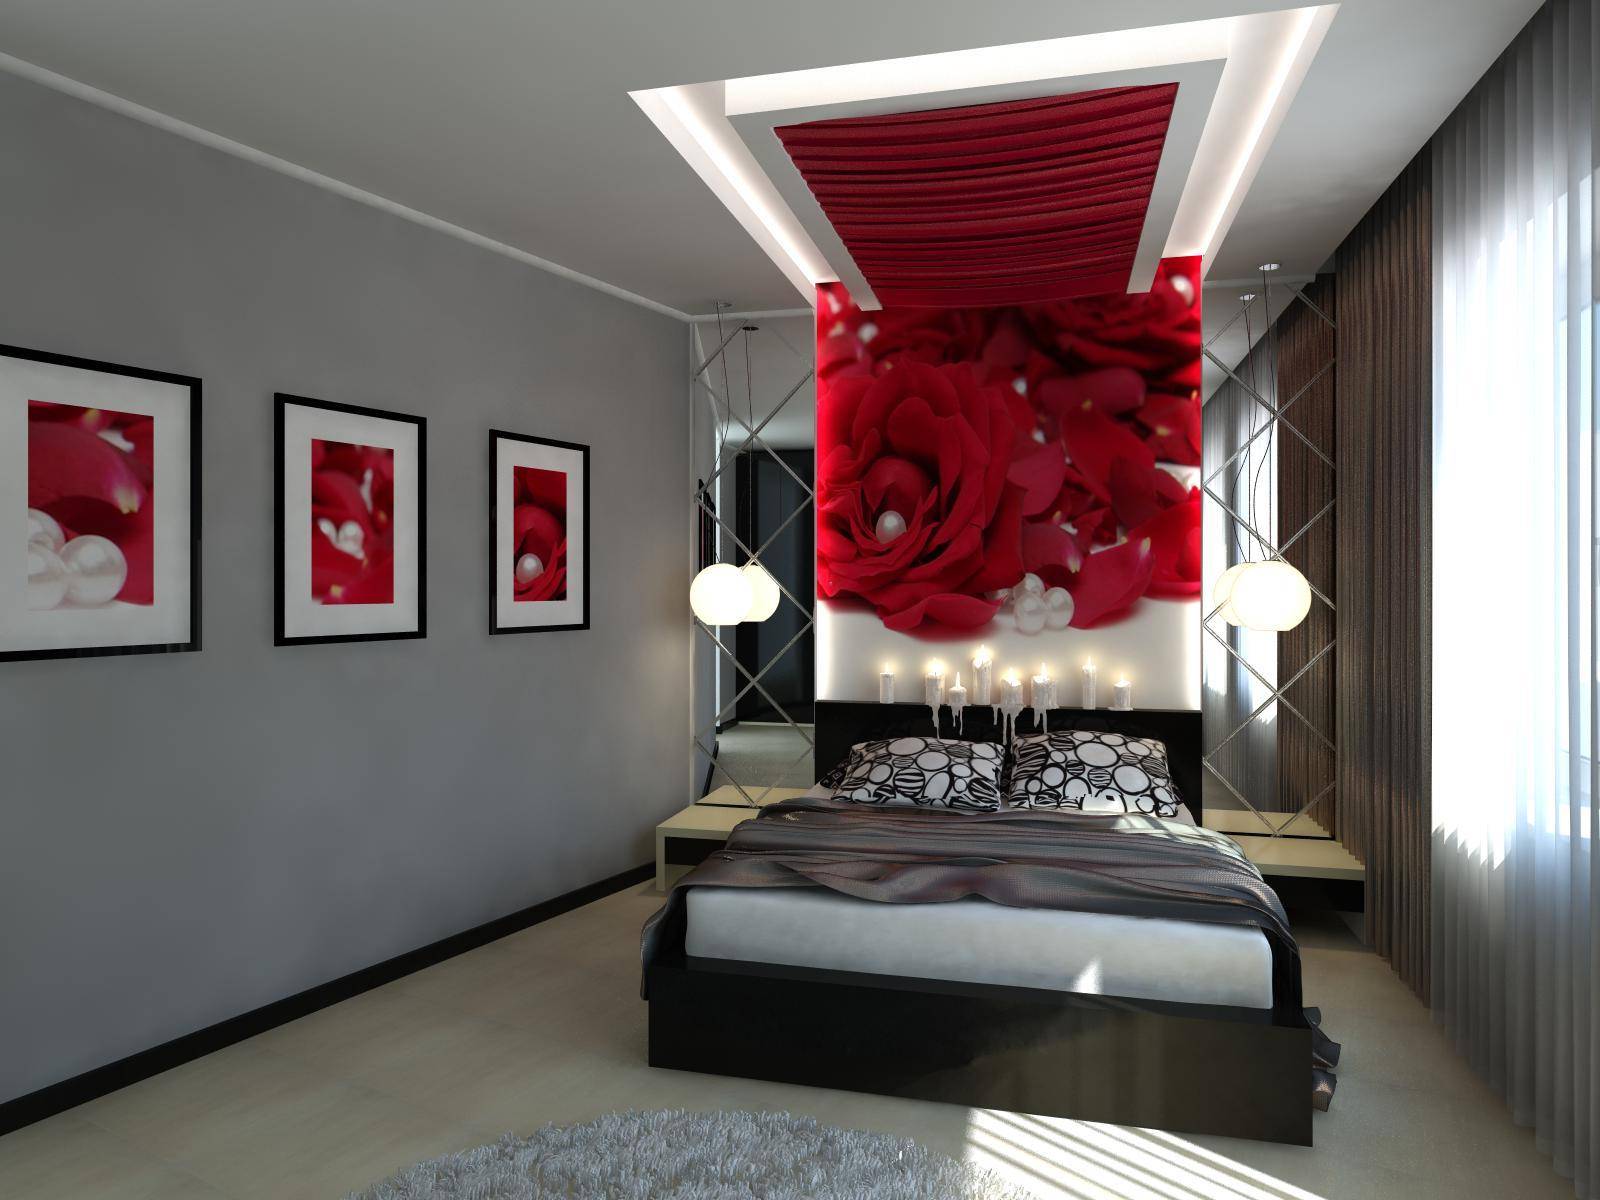 Beautiful Bedrooms In Gray And Red